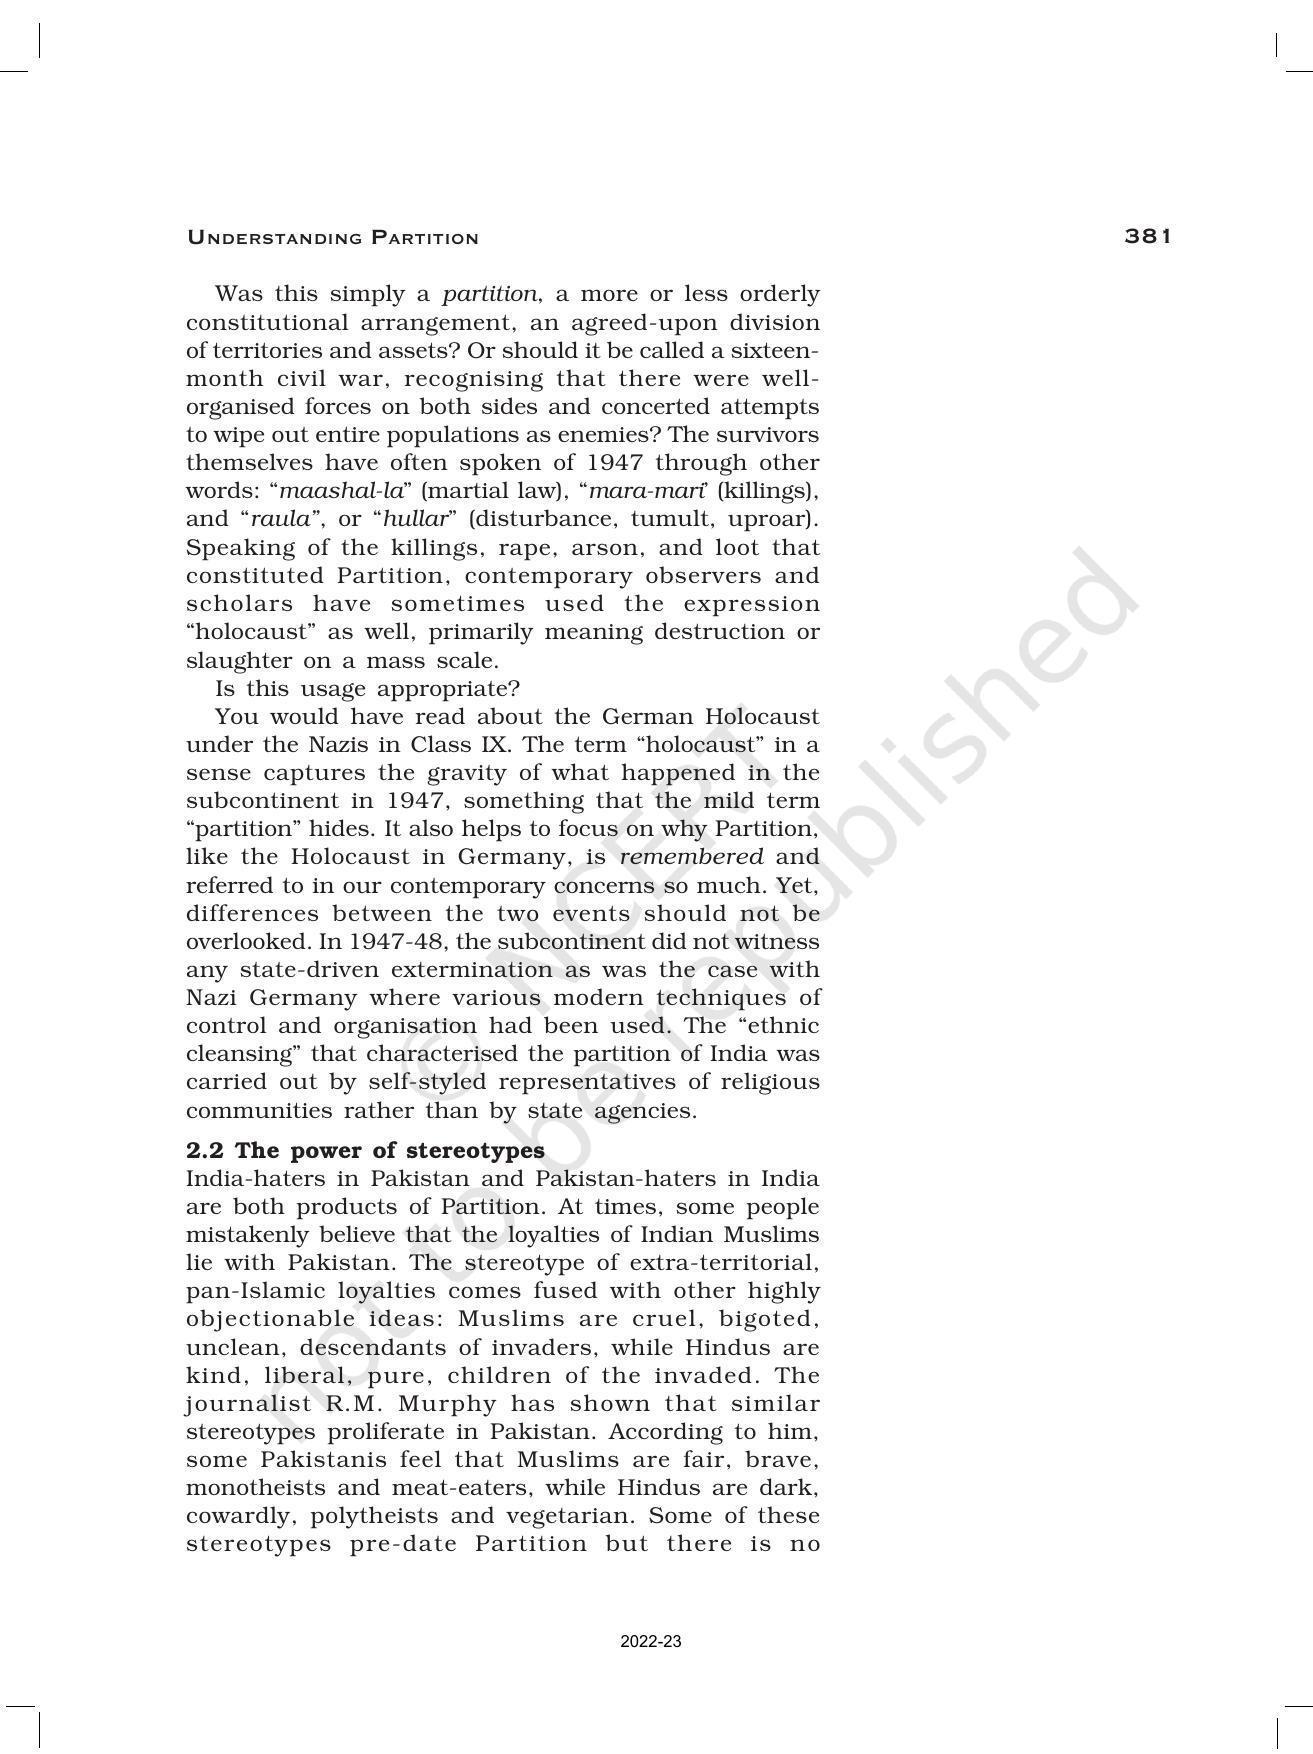 NCERT Book for Class 12 History (Part-III) Chapter 14 Understanding Partition - Page 6